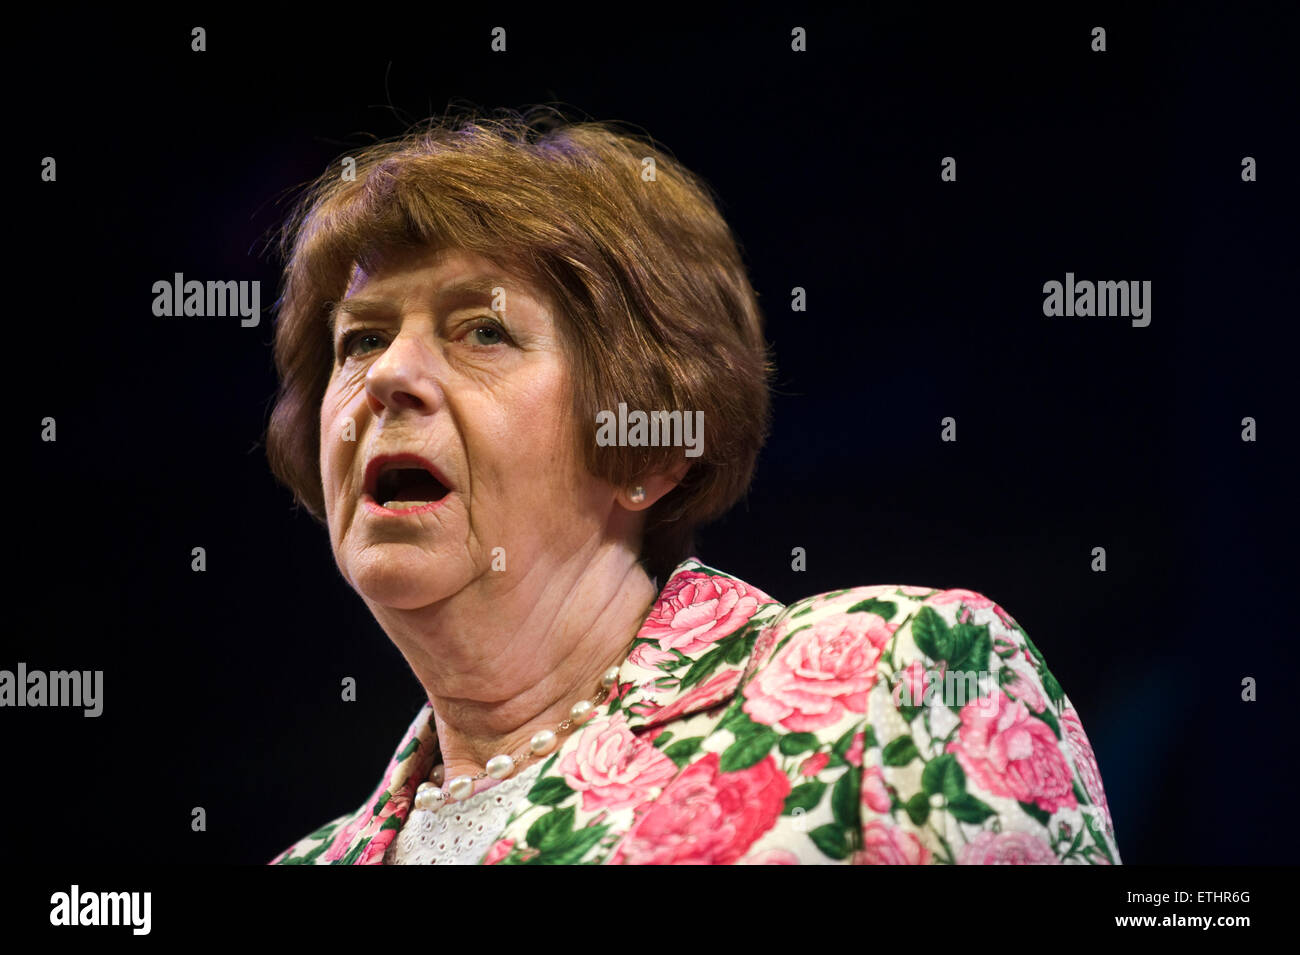 Pam Ayers poet, comedian, author & songwriter performing on stage at Hay Festival 2015 Stock Photo